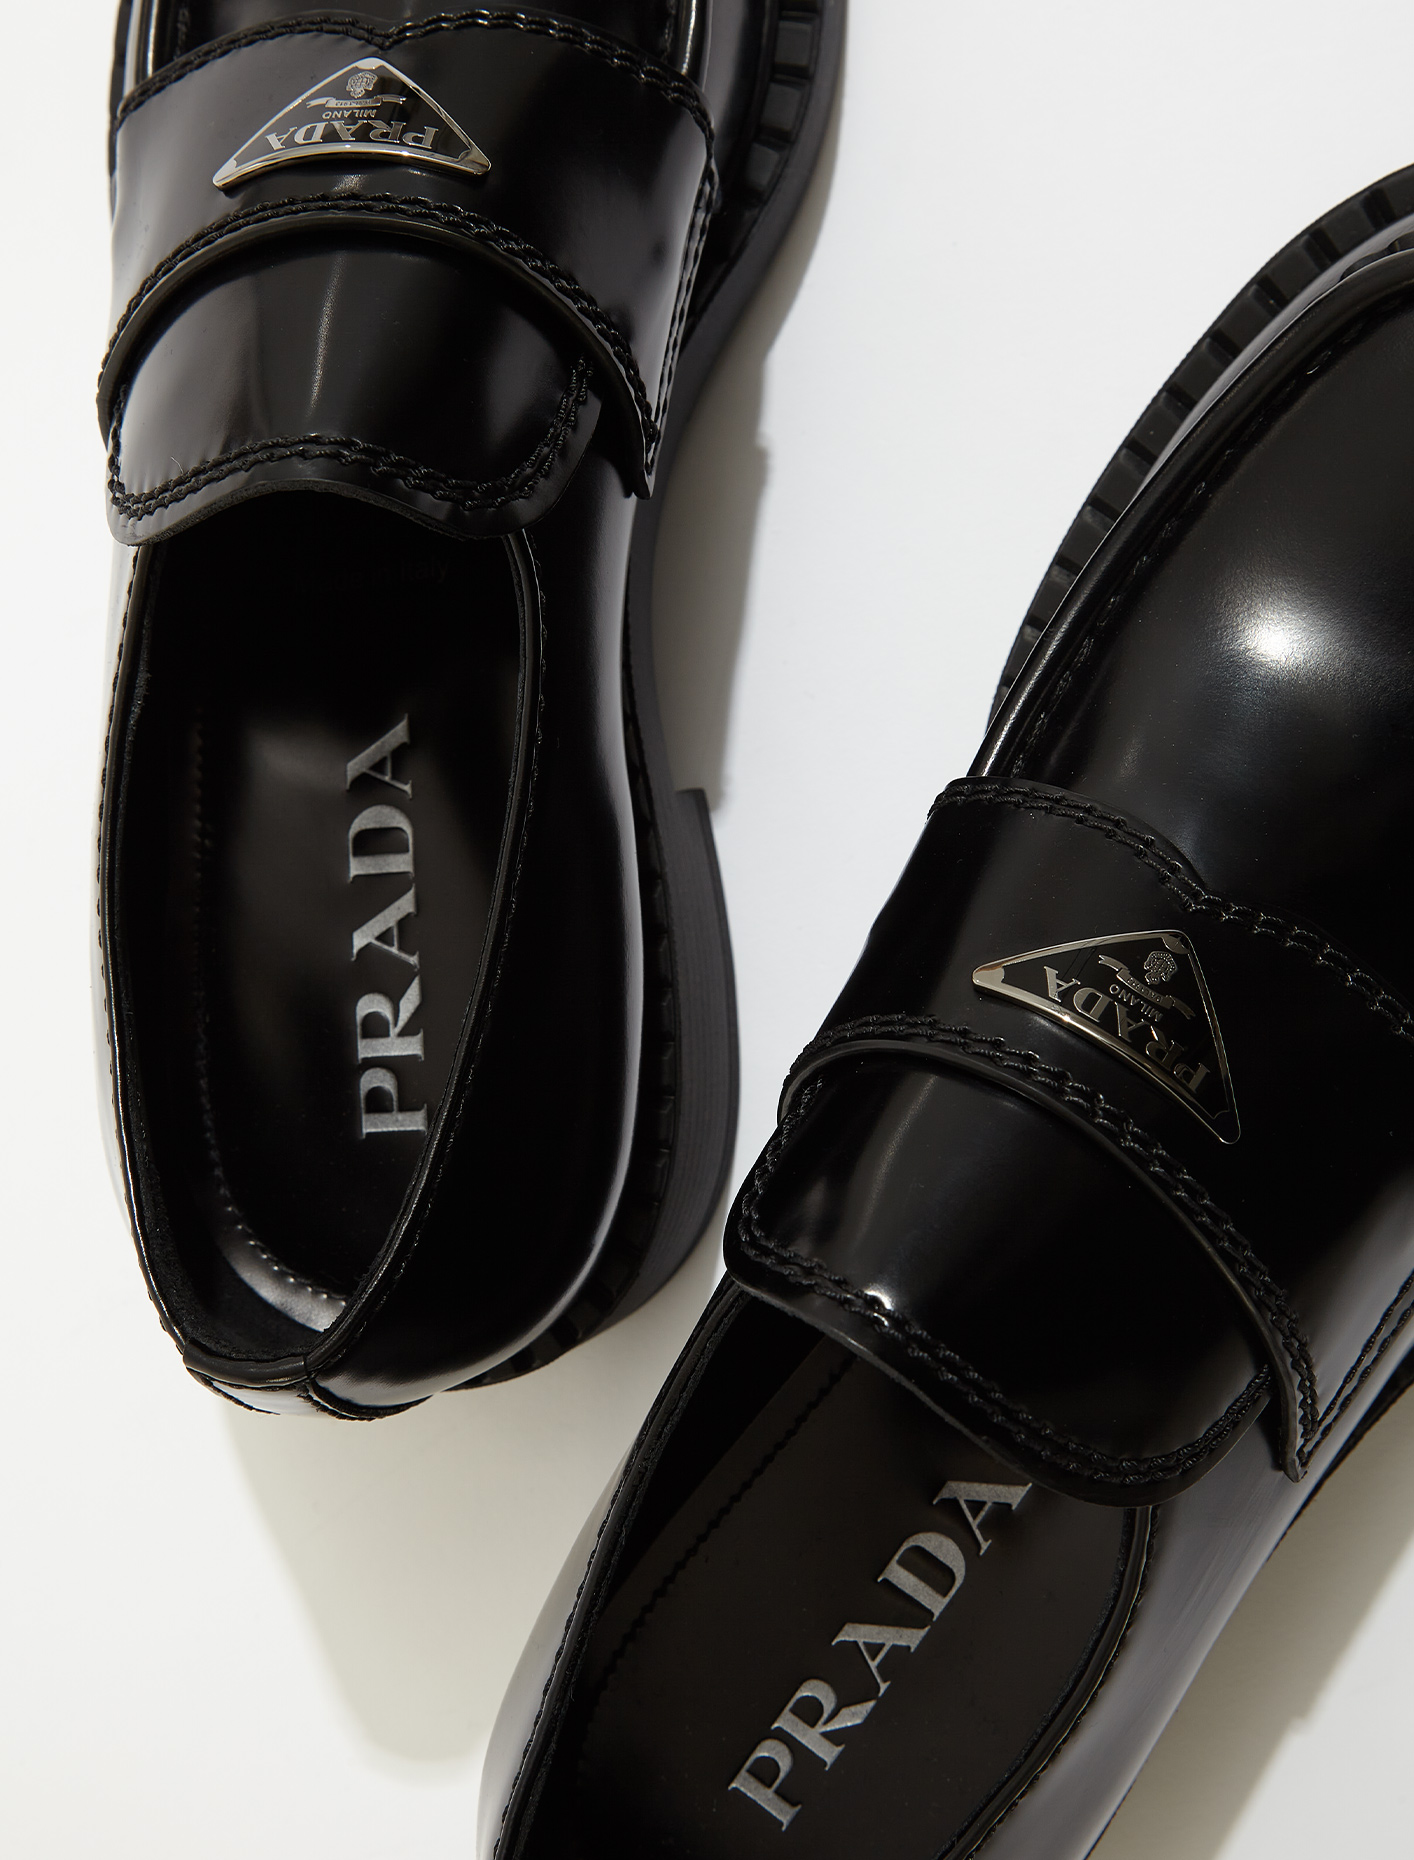 Prada Brushed Leather Loafers in Black | Voo Store Berlin | Worldwide Shipping